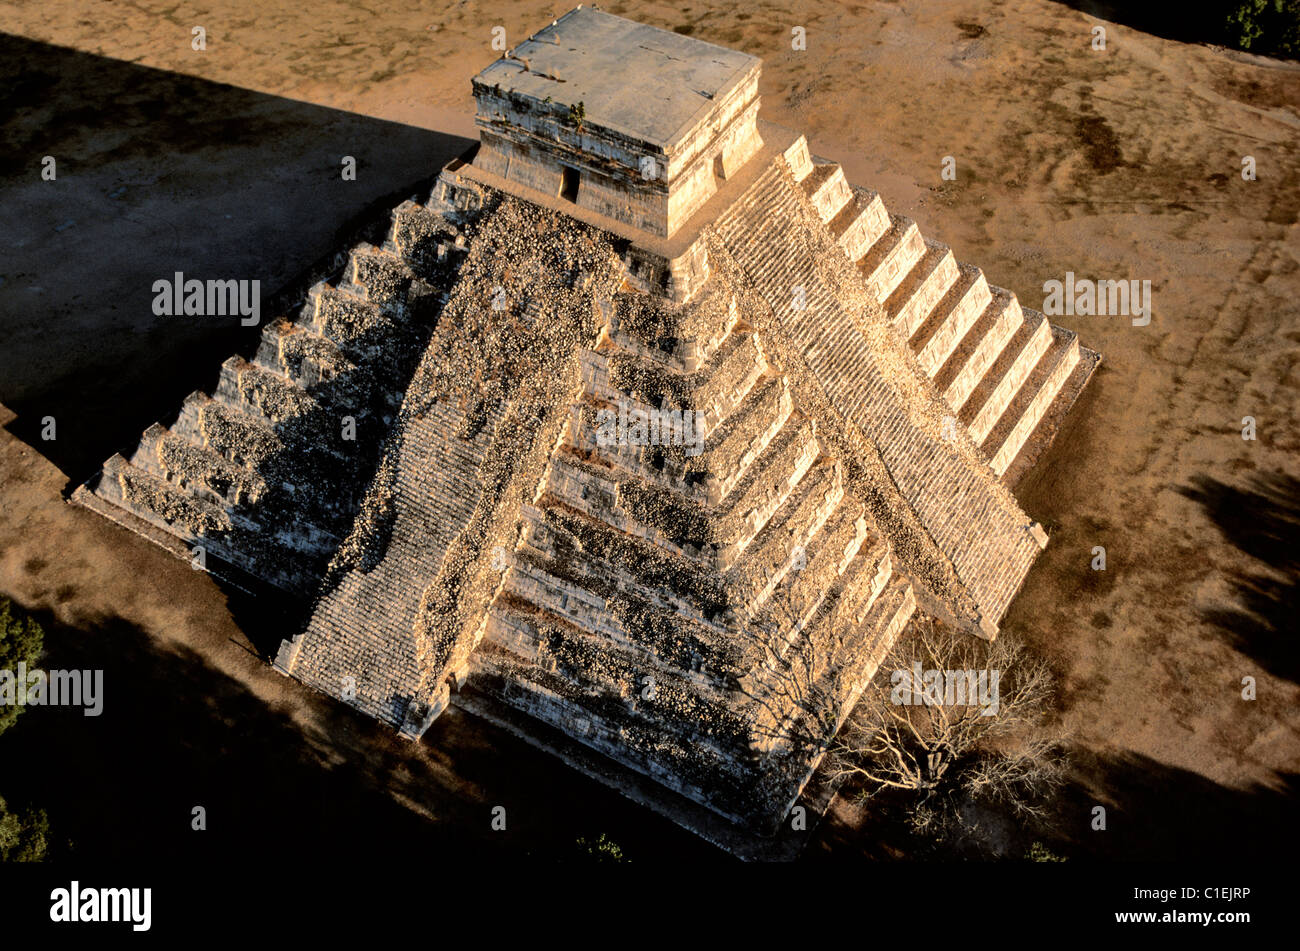 Mexico Yucatan State archaeological site of Chichen Itza listed as World Heritage by UNESCO castle or pyramid of Kukulcan Stock Photo